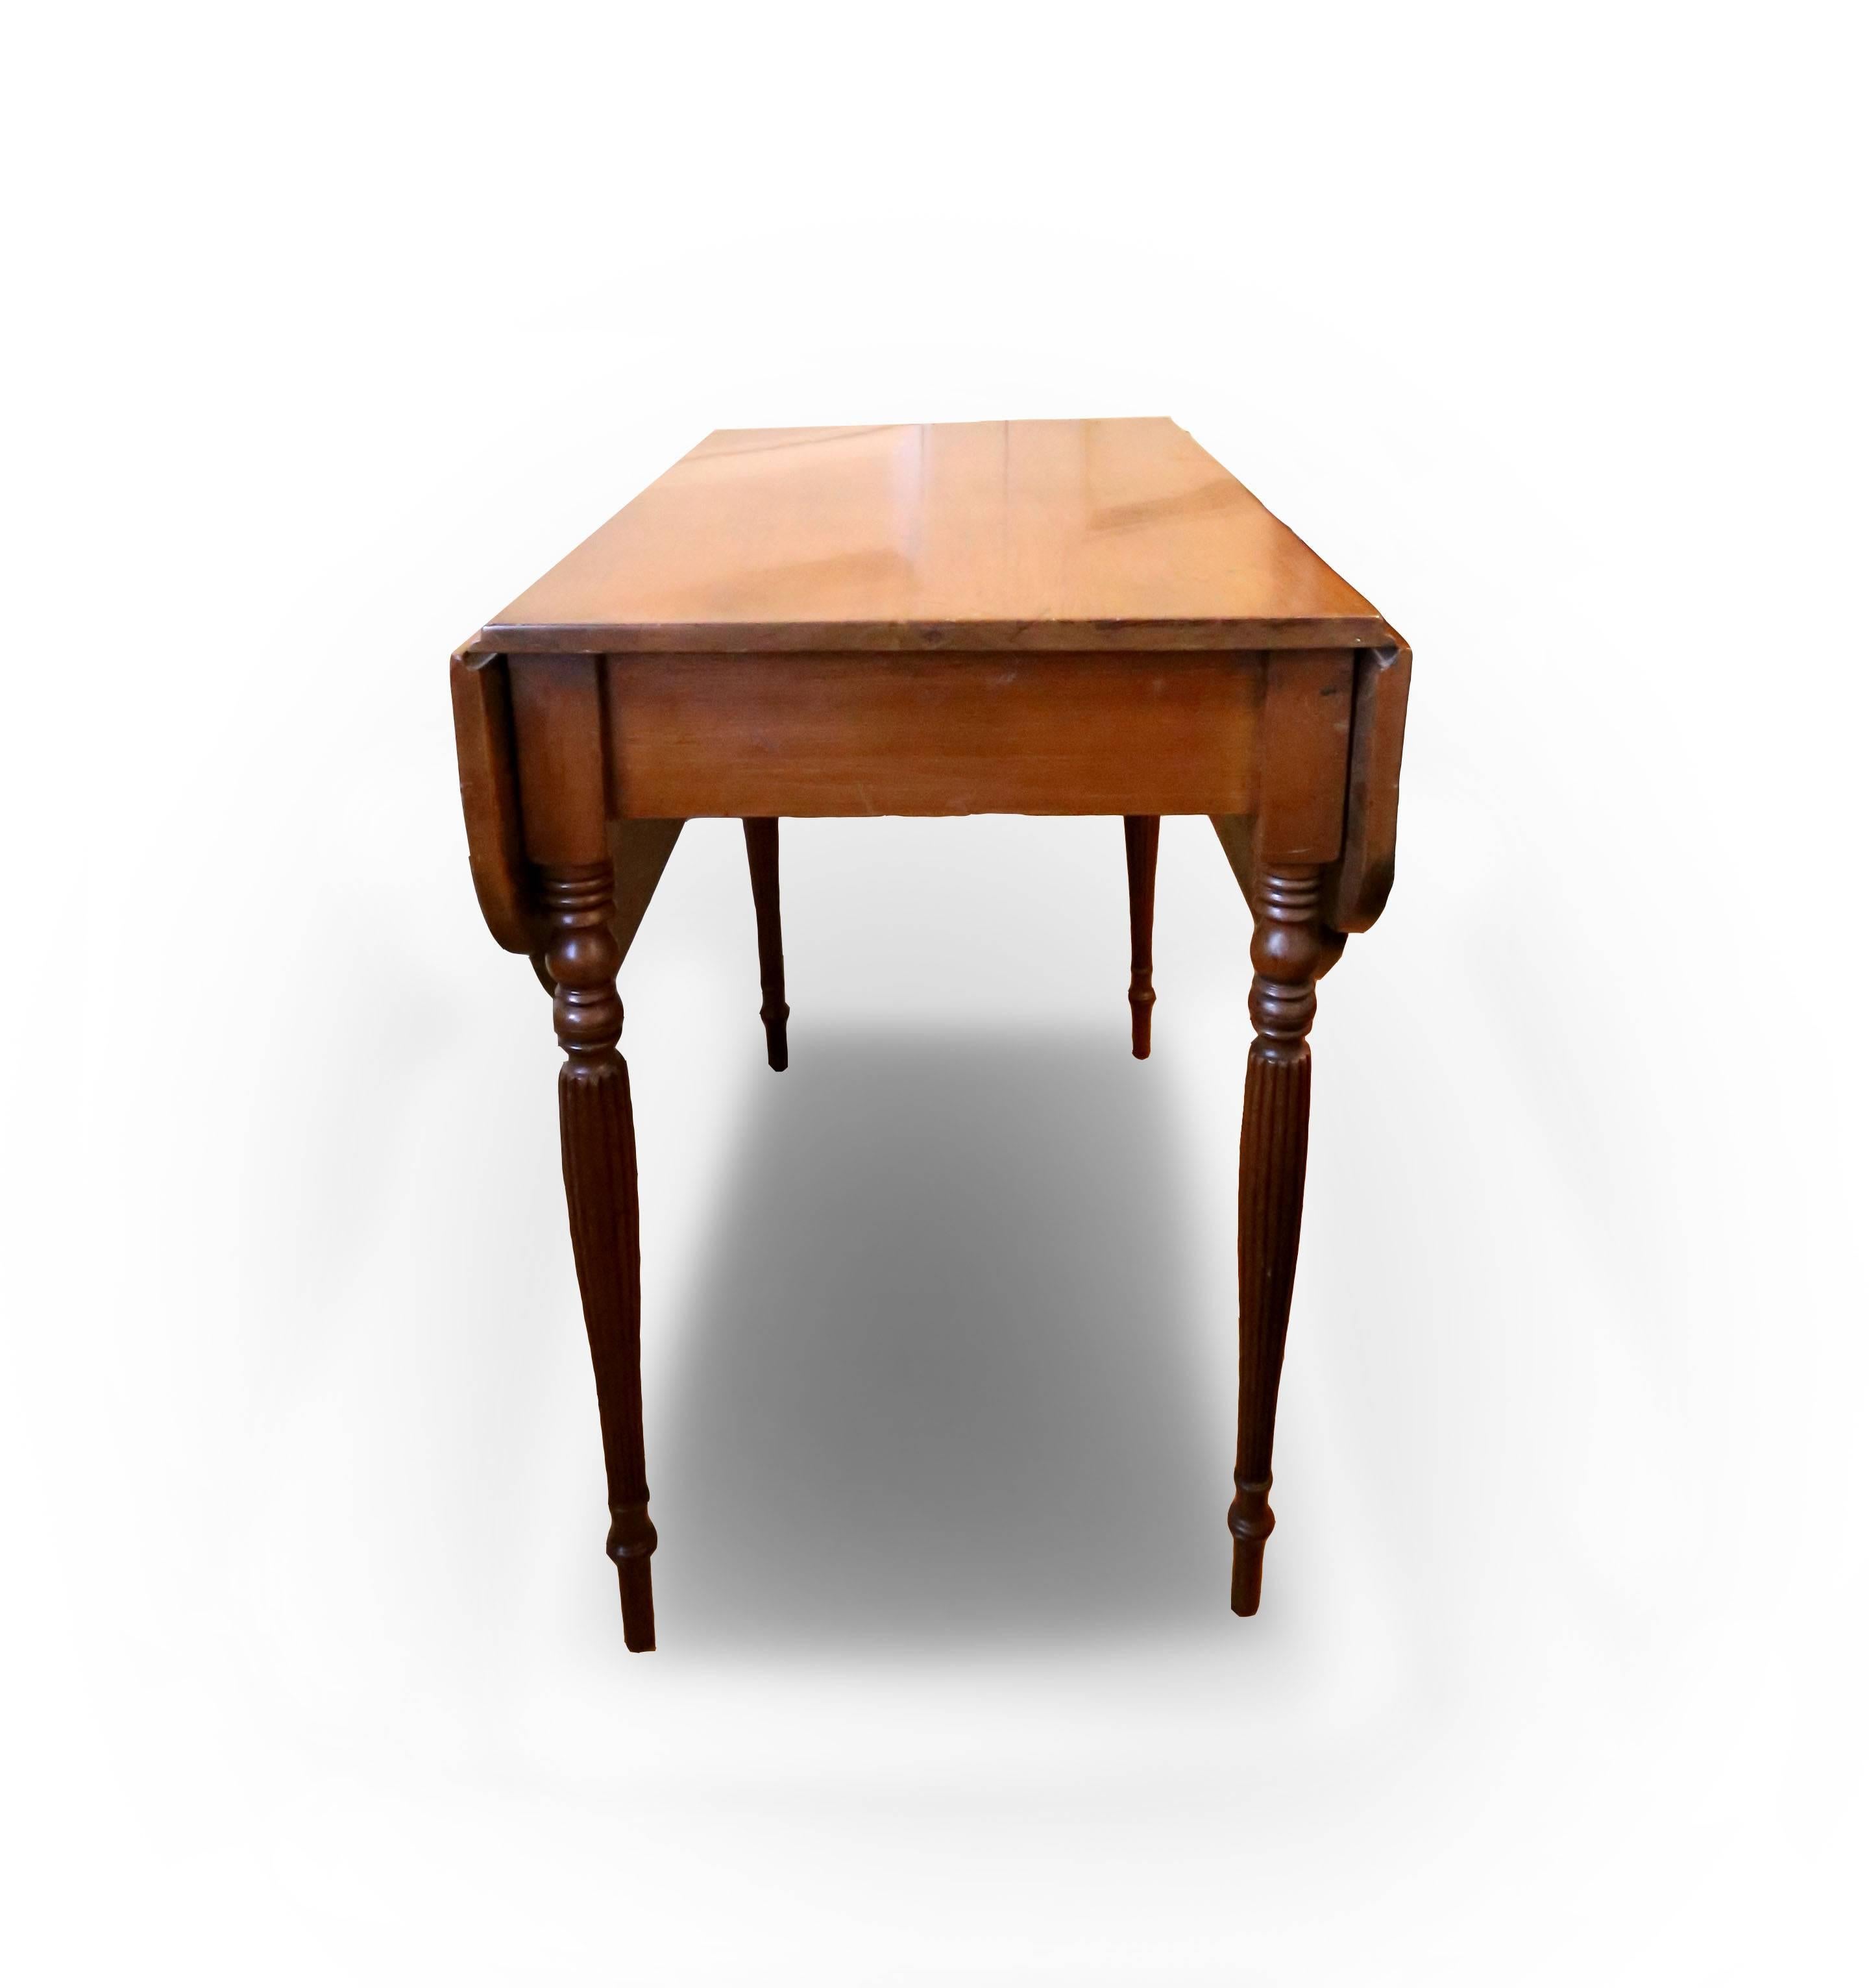 A fine maple drop leaf table of fine proportions, top with cyma corners, legs with delicate reeding. School of Duncan Phyfe, warm light patina. American, New York, circa 1810.